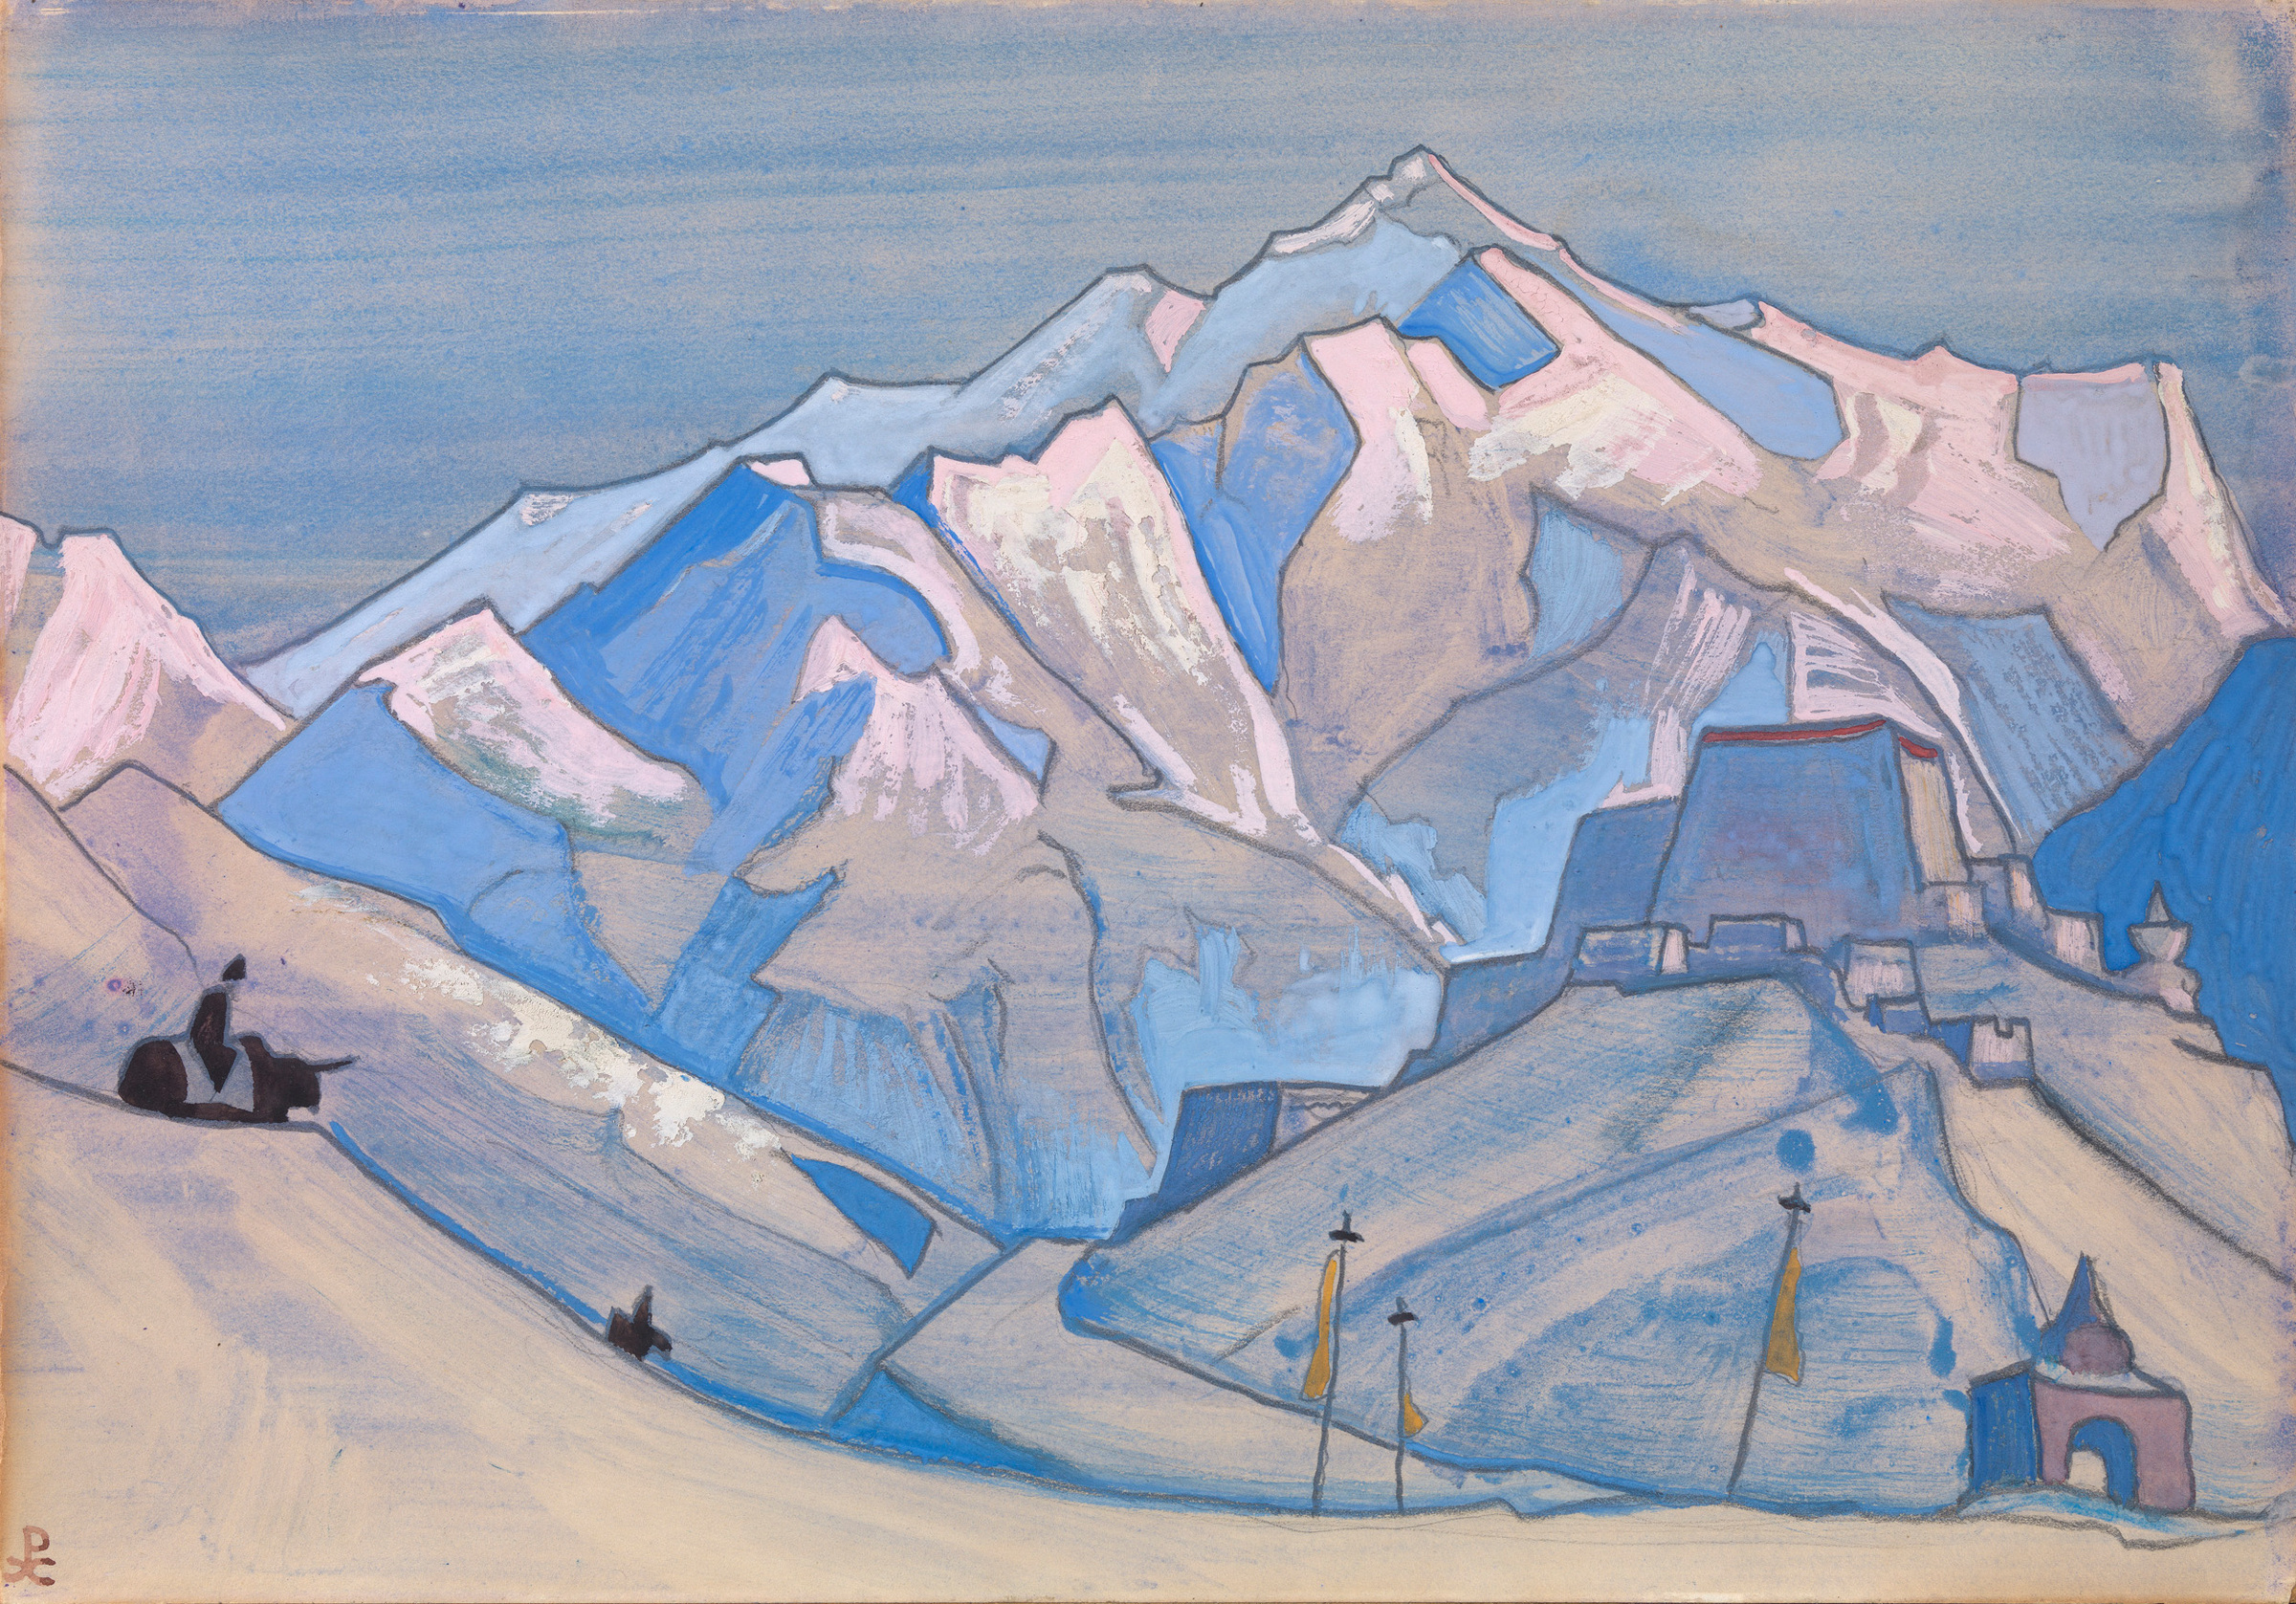 <a href='/en/catalogue/view?id=16103'>Lot</a> ROERICH, NICHOLAS, <i>Holy Mountains</i><br> SOLD FOR 96,408 GBP.